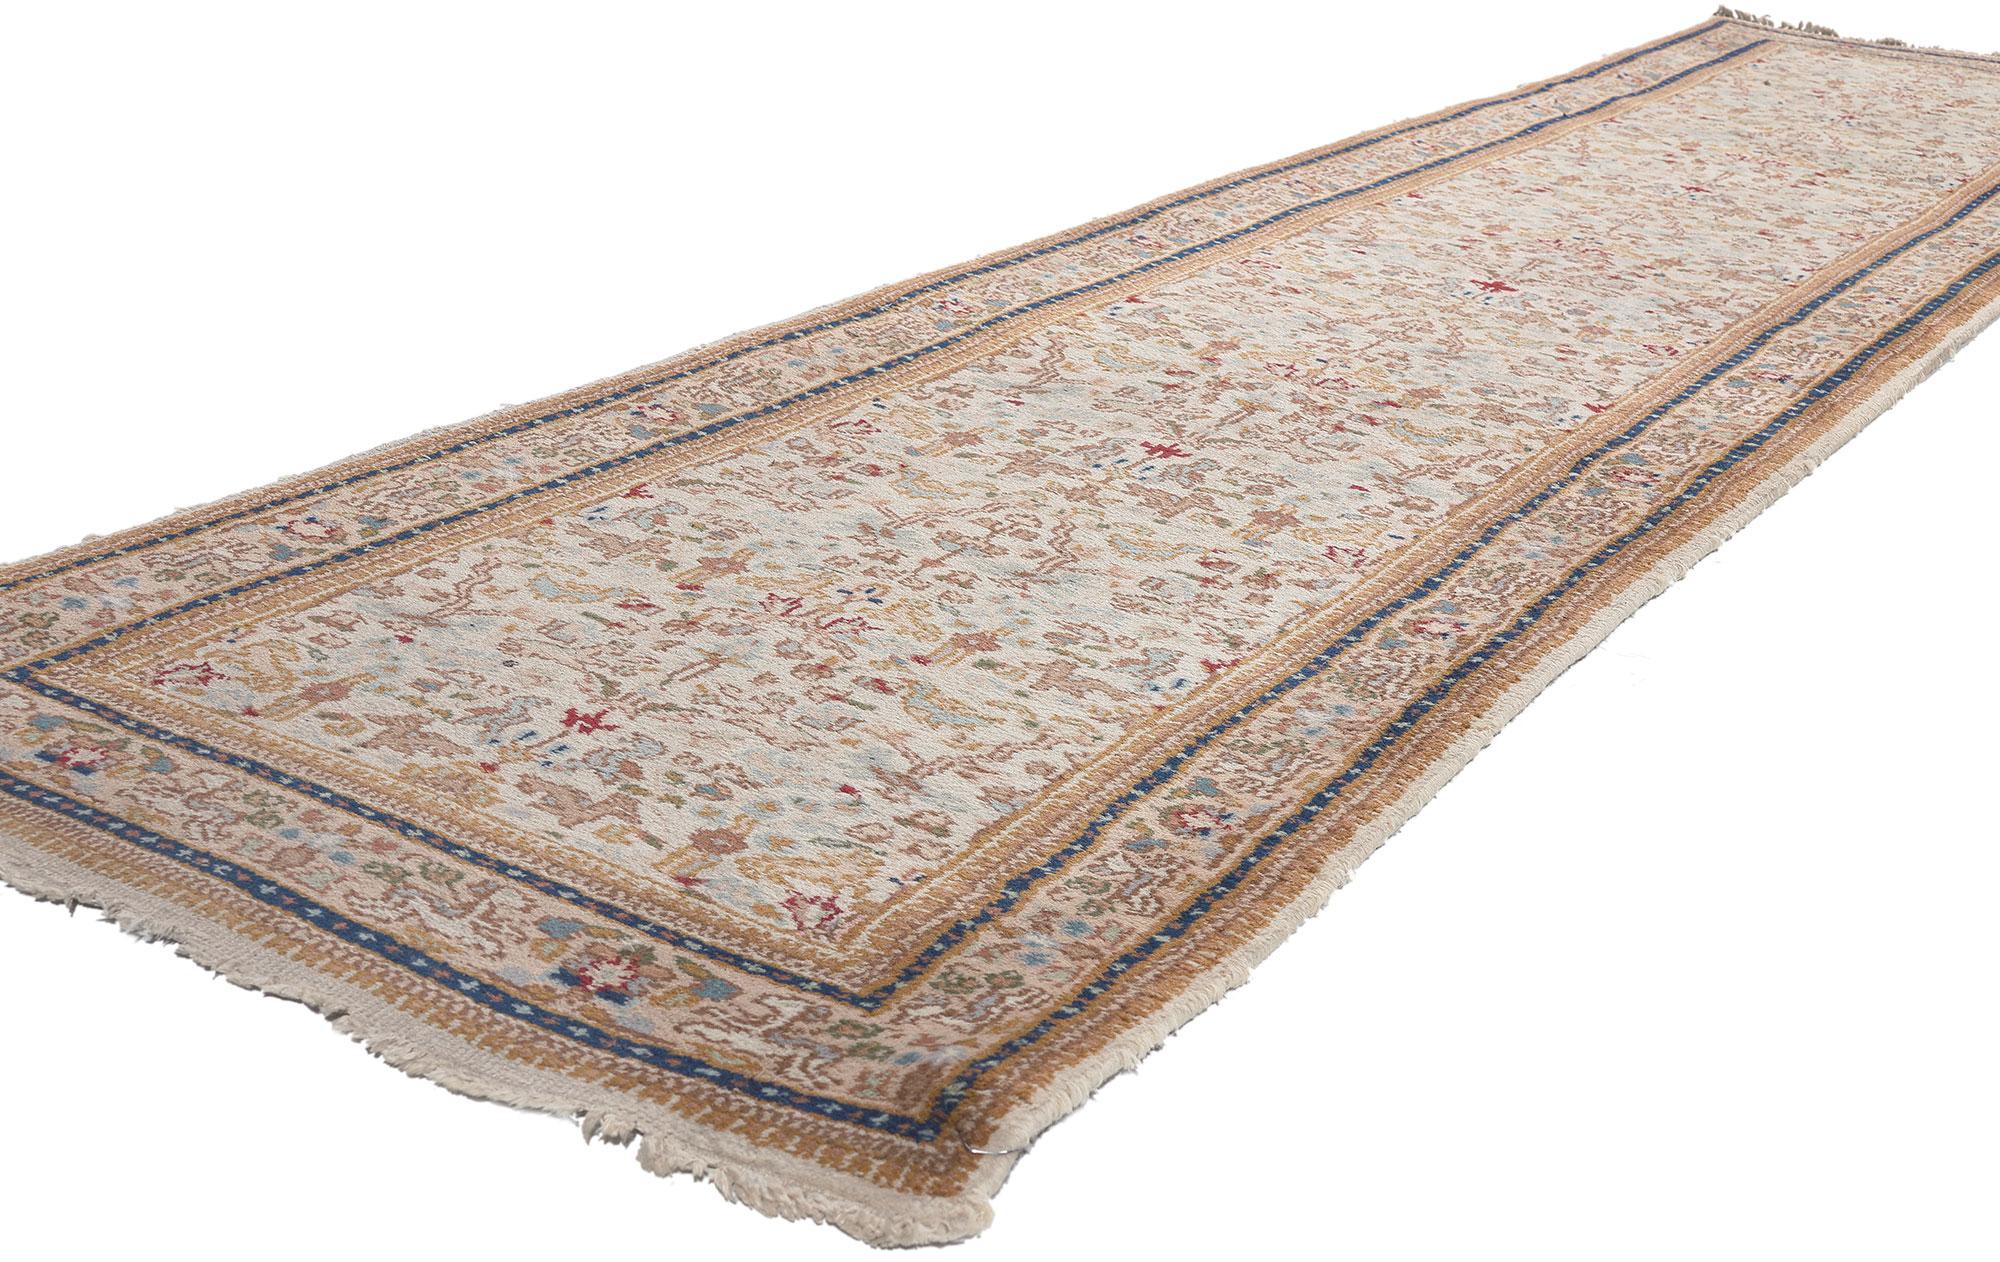 78538 Vintage Indian Runner, 02'07 x 11'08.
Earth-tone elegance meets cozy comfort in this hand knotted wool vintage Indian runner. The decorative details and soft pastel colors woven into this piece work together creating a warm and welcoming feel.